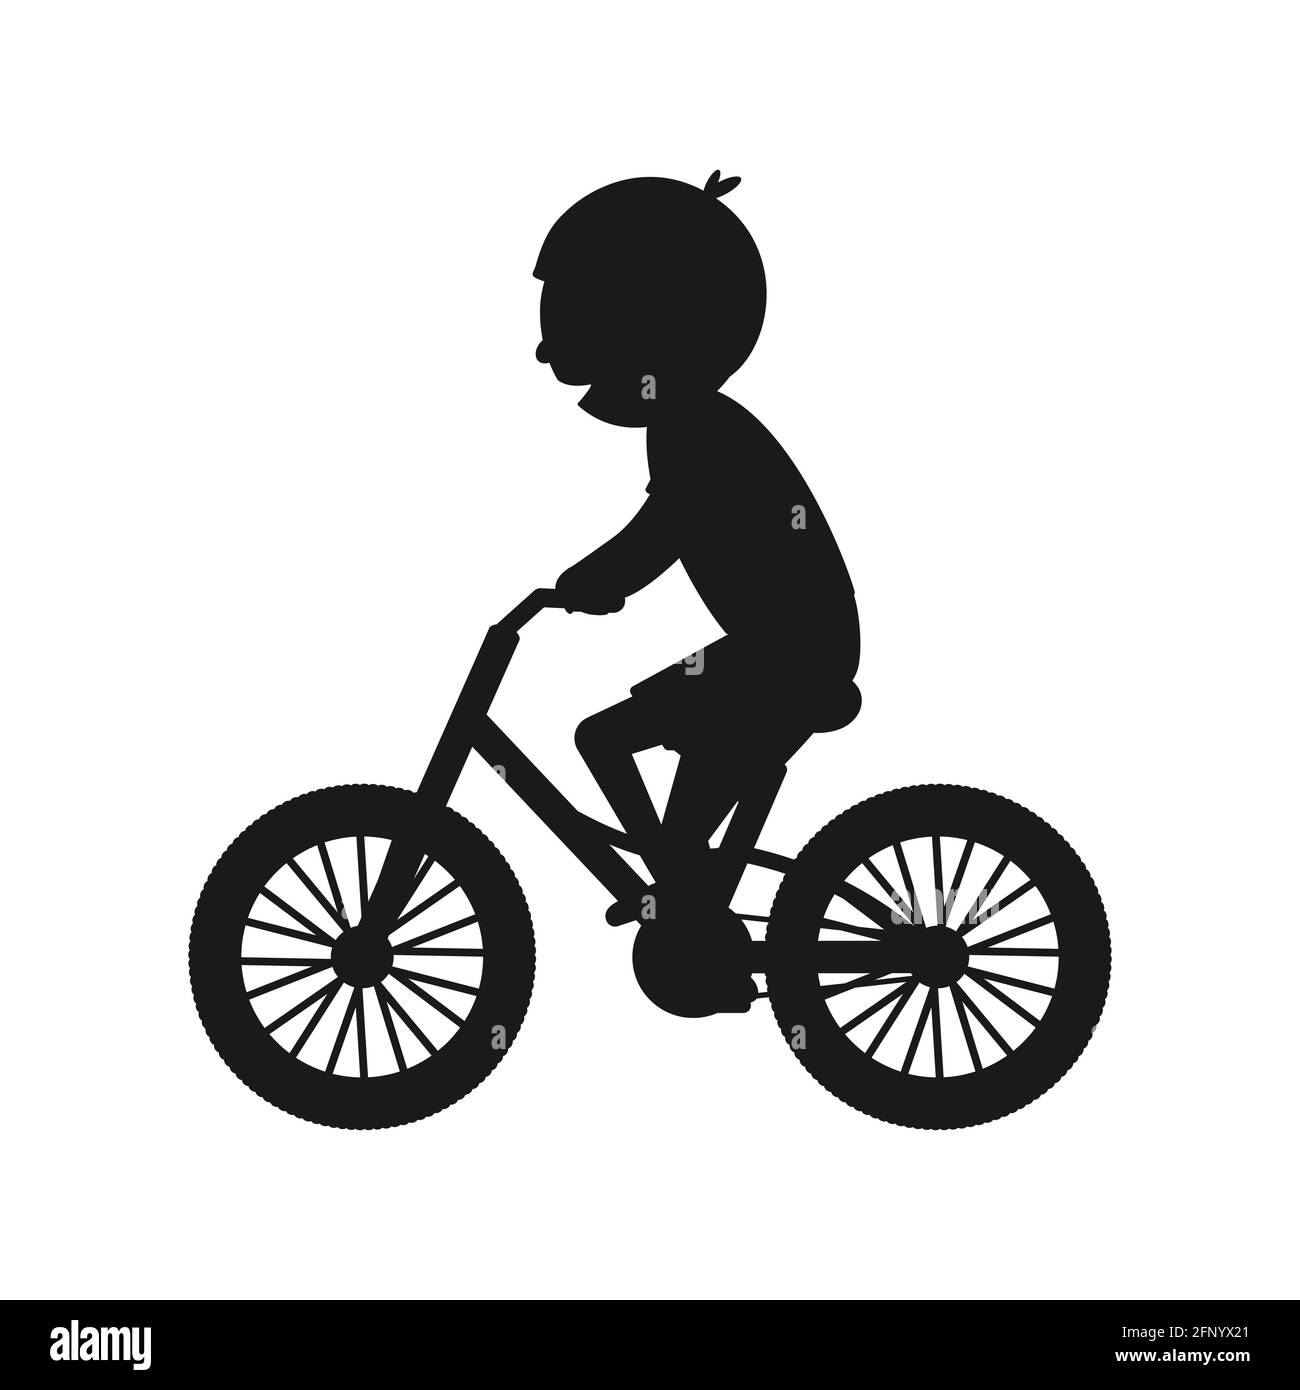 Cute boy riding bike silhouette. Healthy lifestyle in black color concept. Little child rides bicycle. Stock Vector